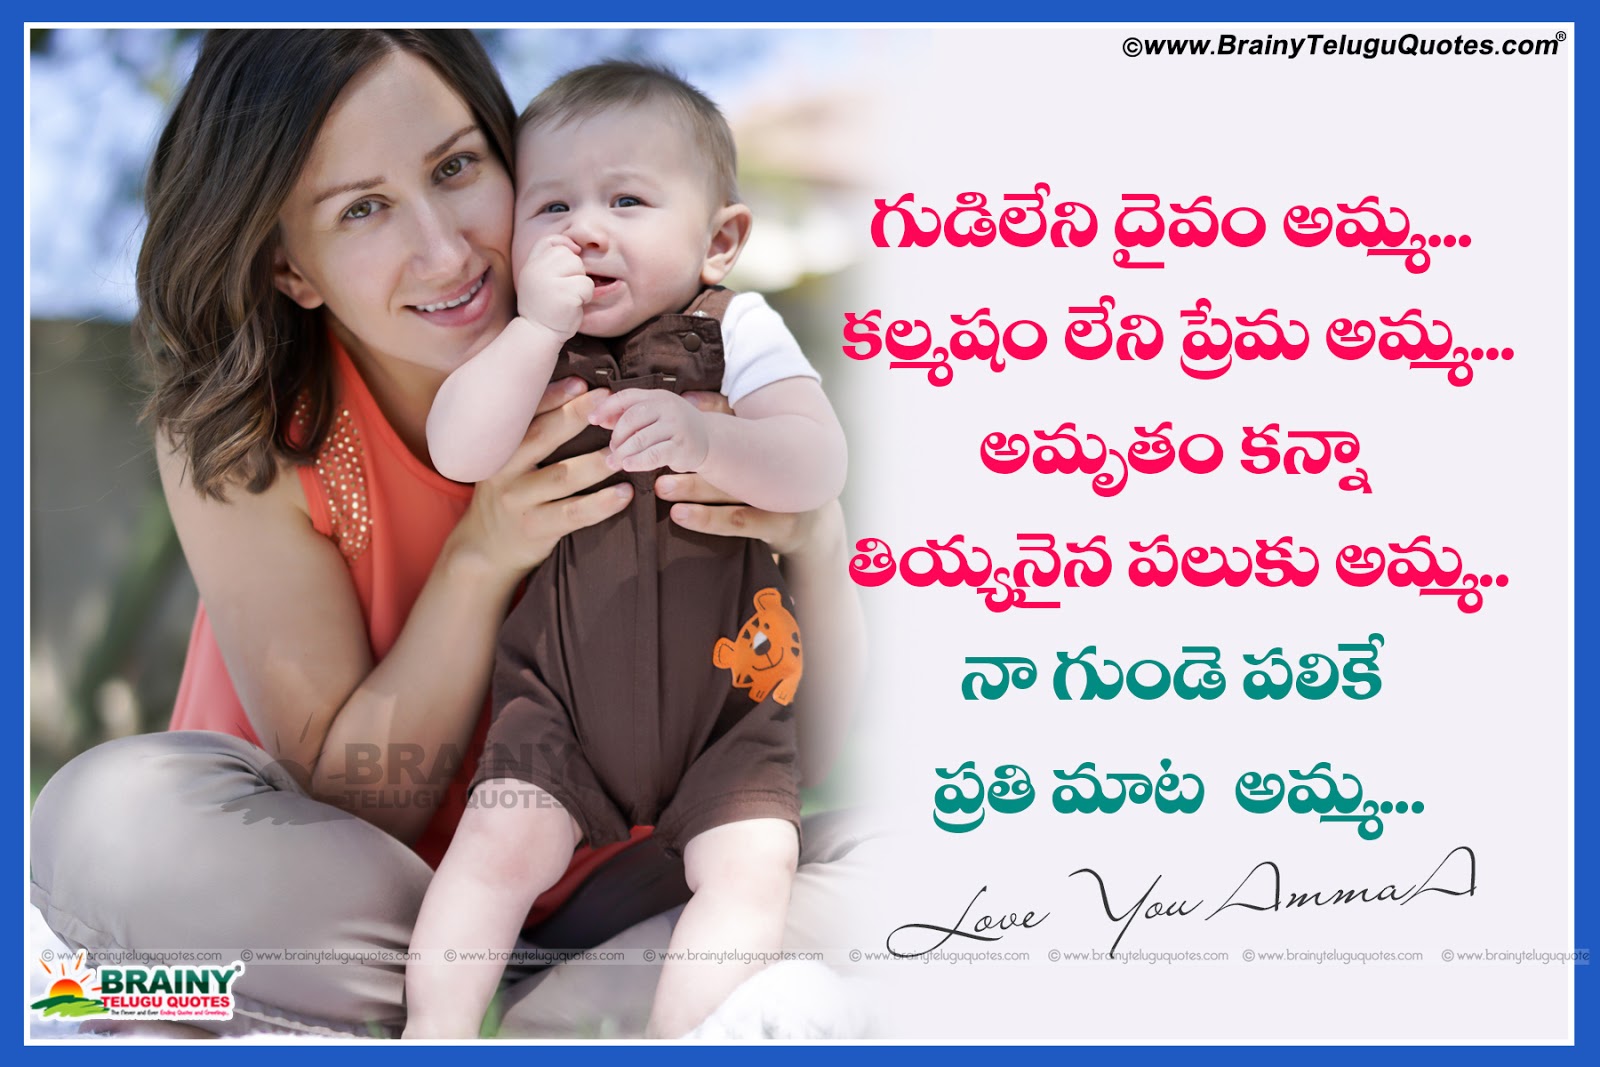 Открытка для день матери in Telugu. About mother. Love your mother not girls quotation.